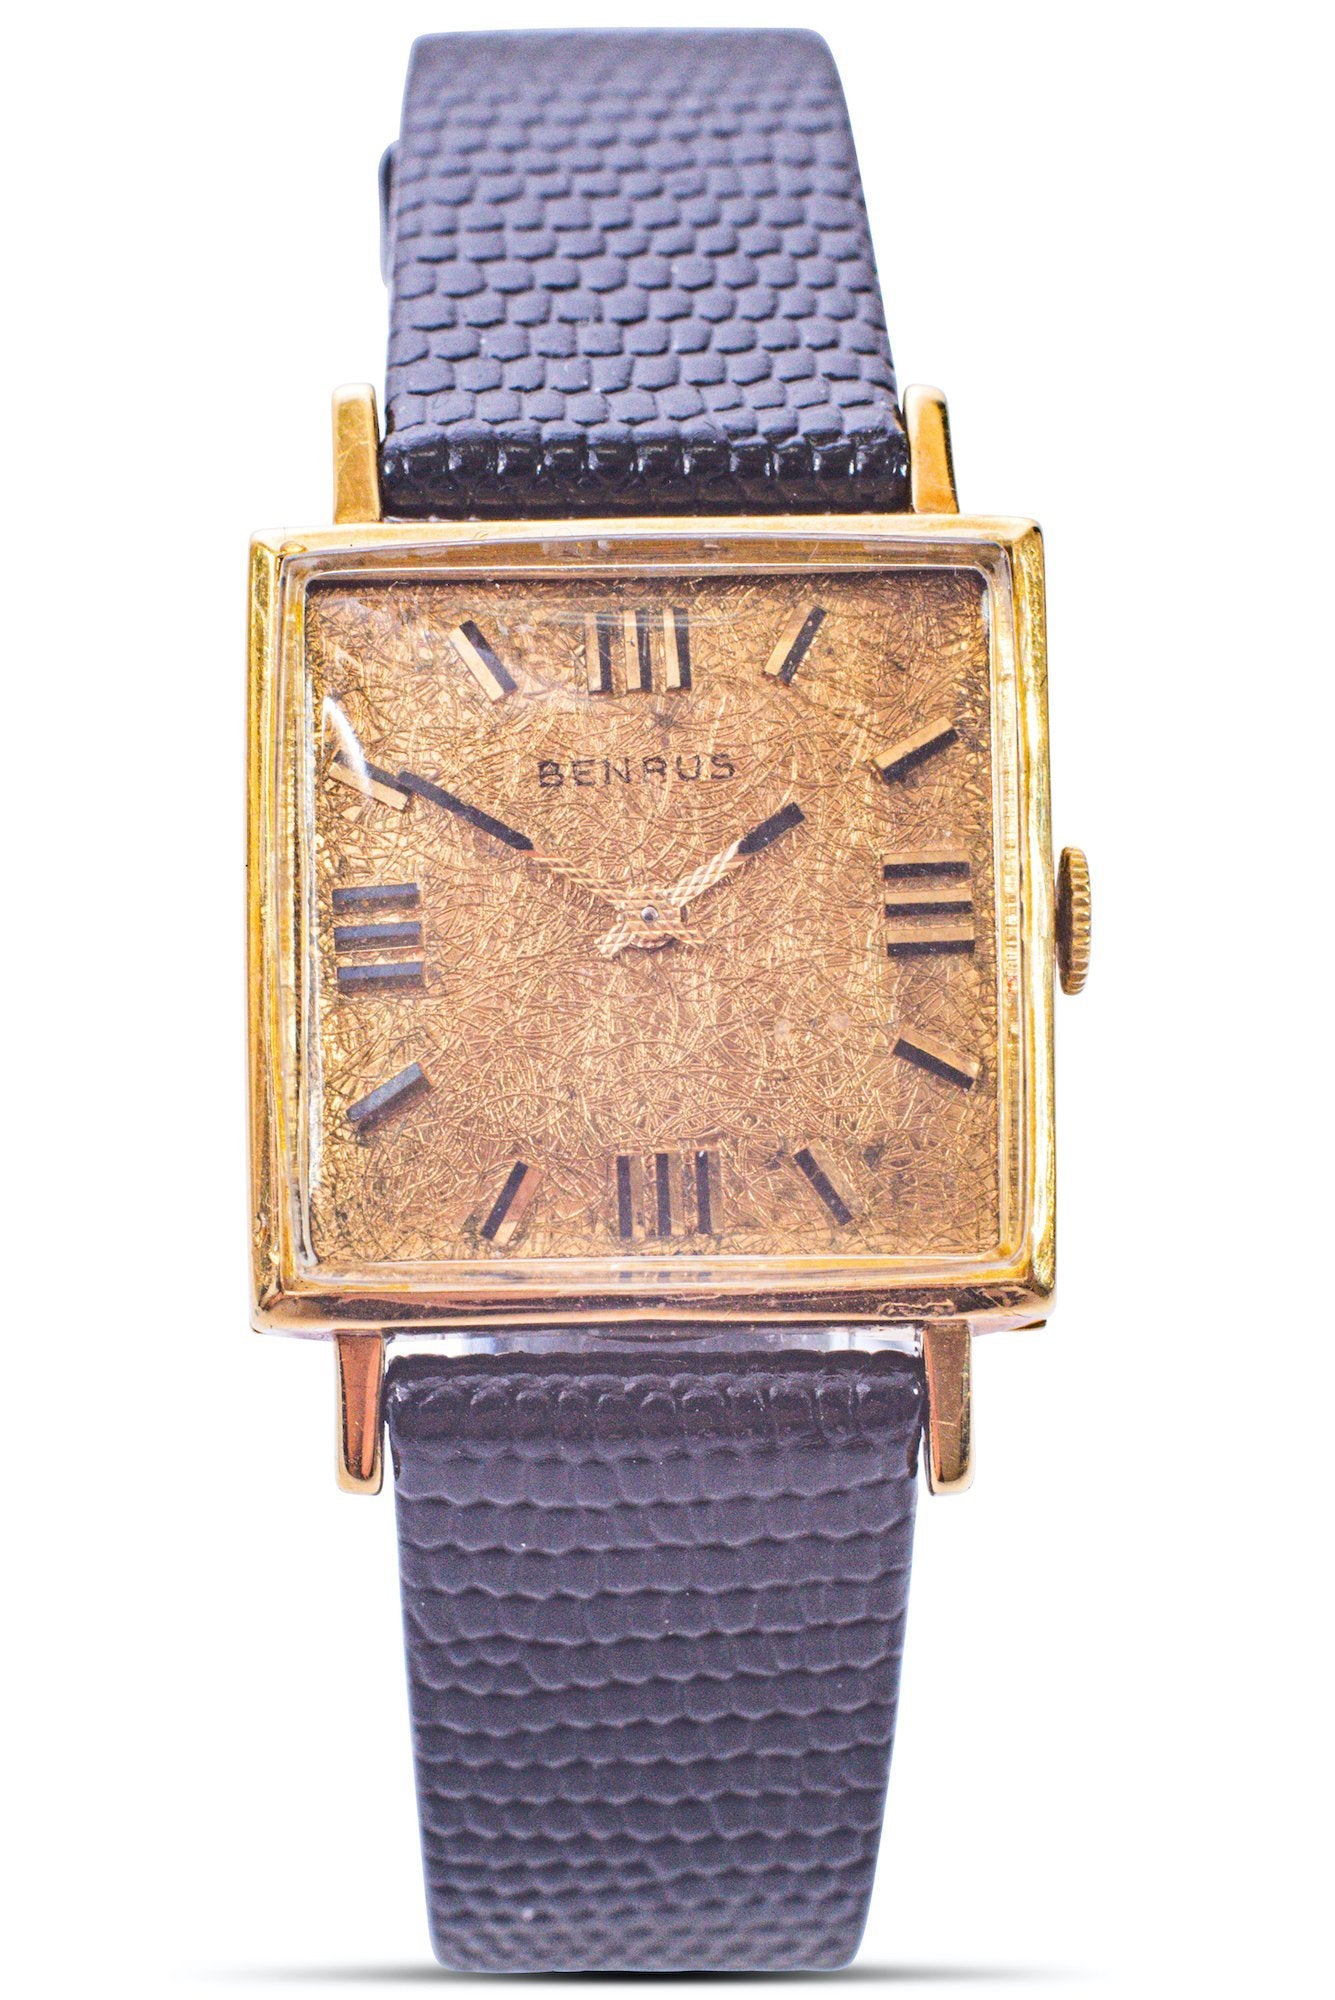 Benrus Square - Rare! - Counting Time Watch Purveyors